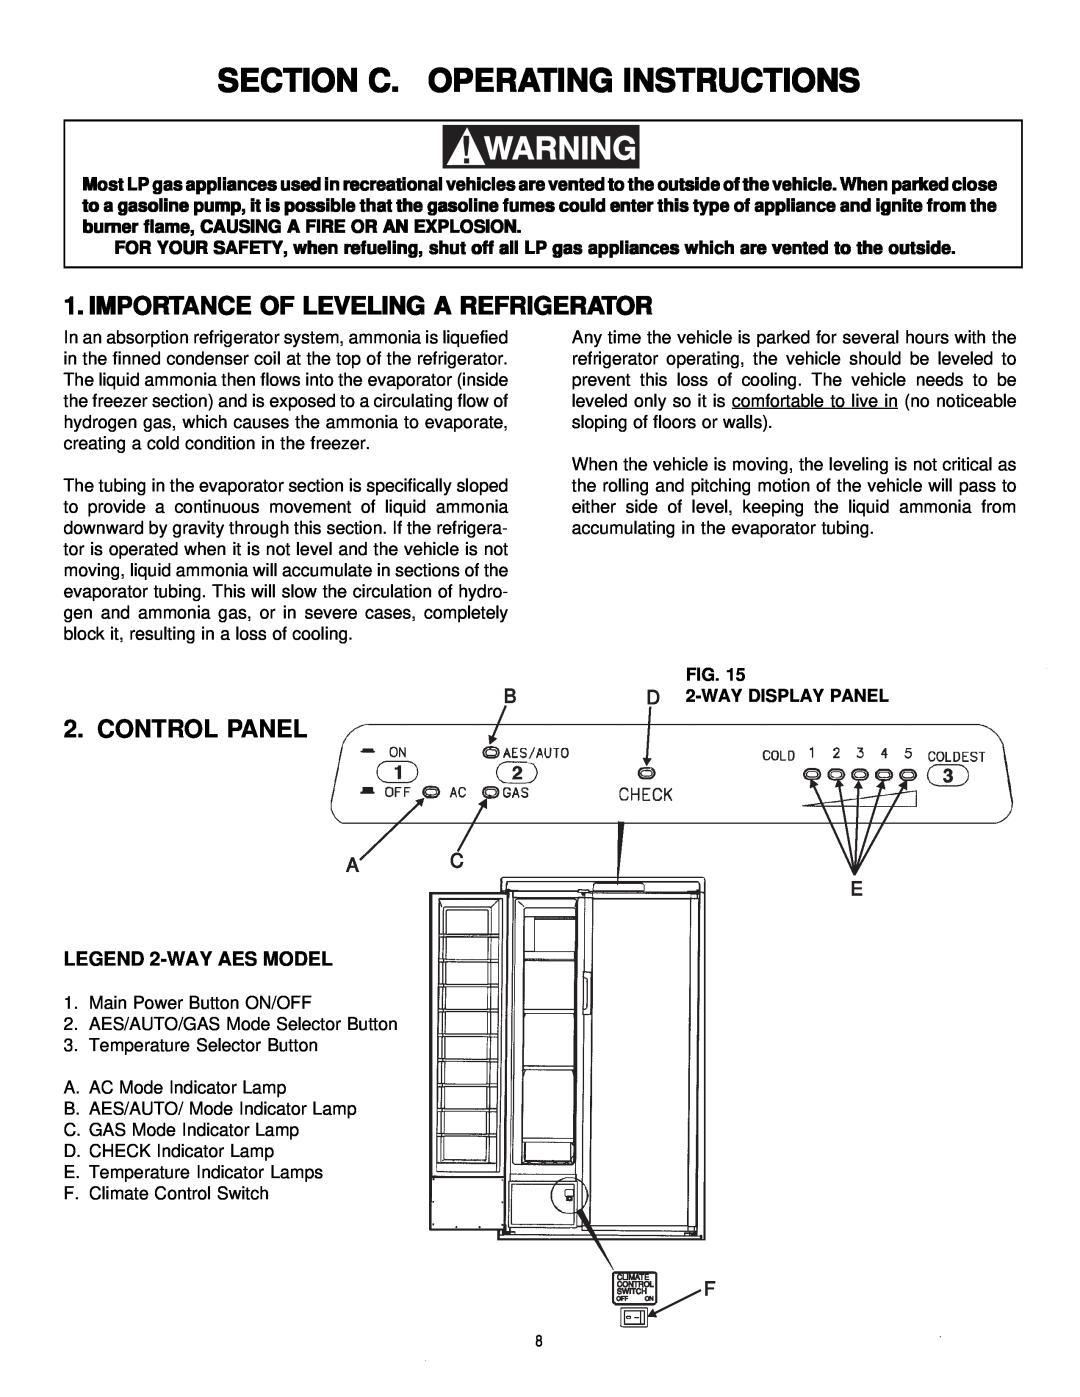 Dometic Elite RM7732 manual Section C. Operating Instructions, Importance Of Leveling A Refrigerator, Control Panel 